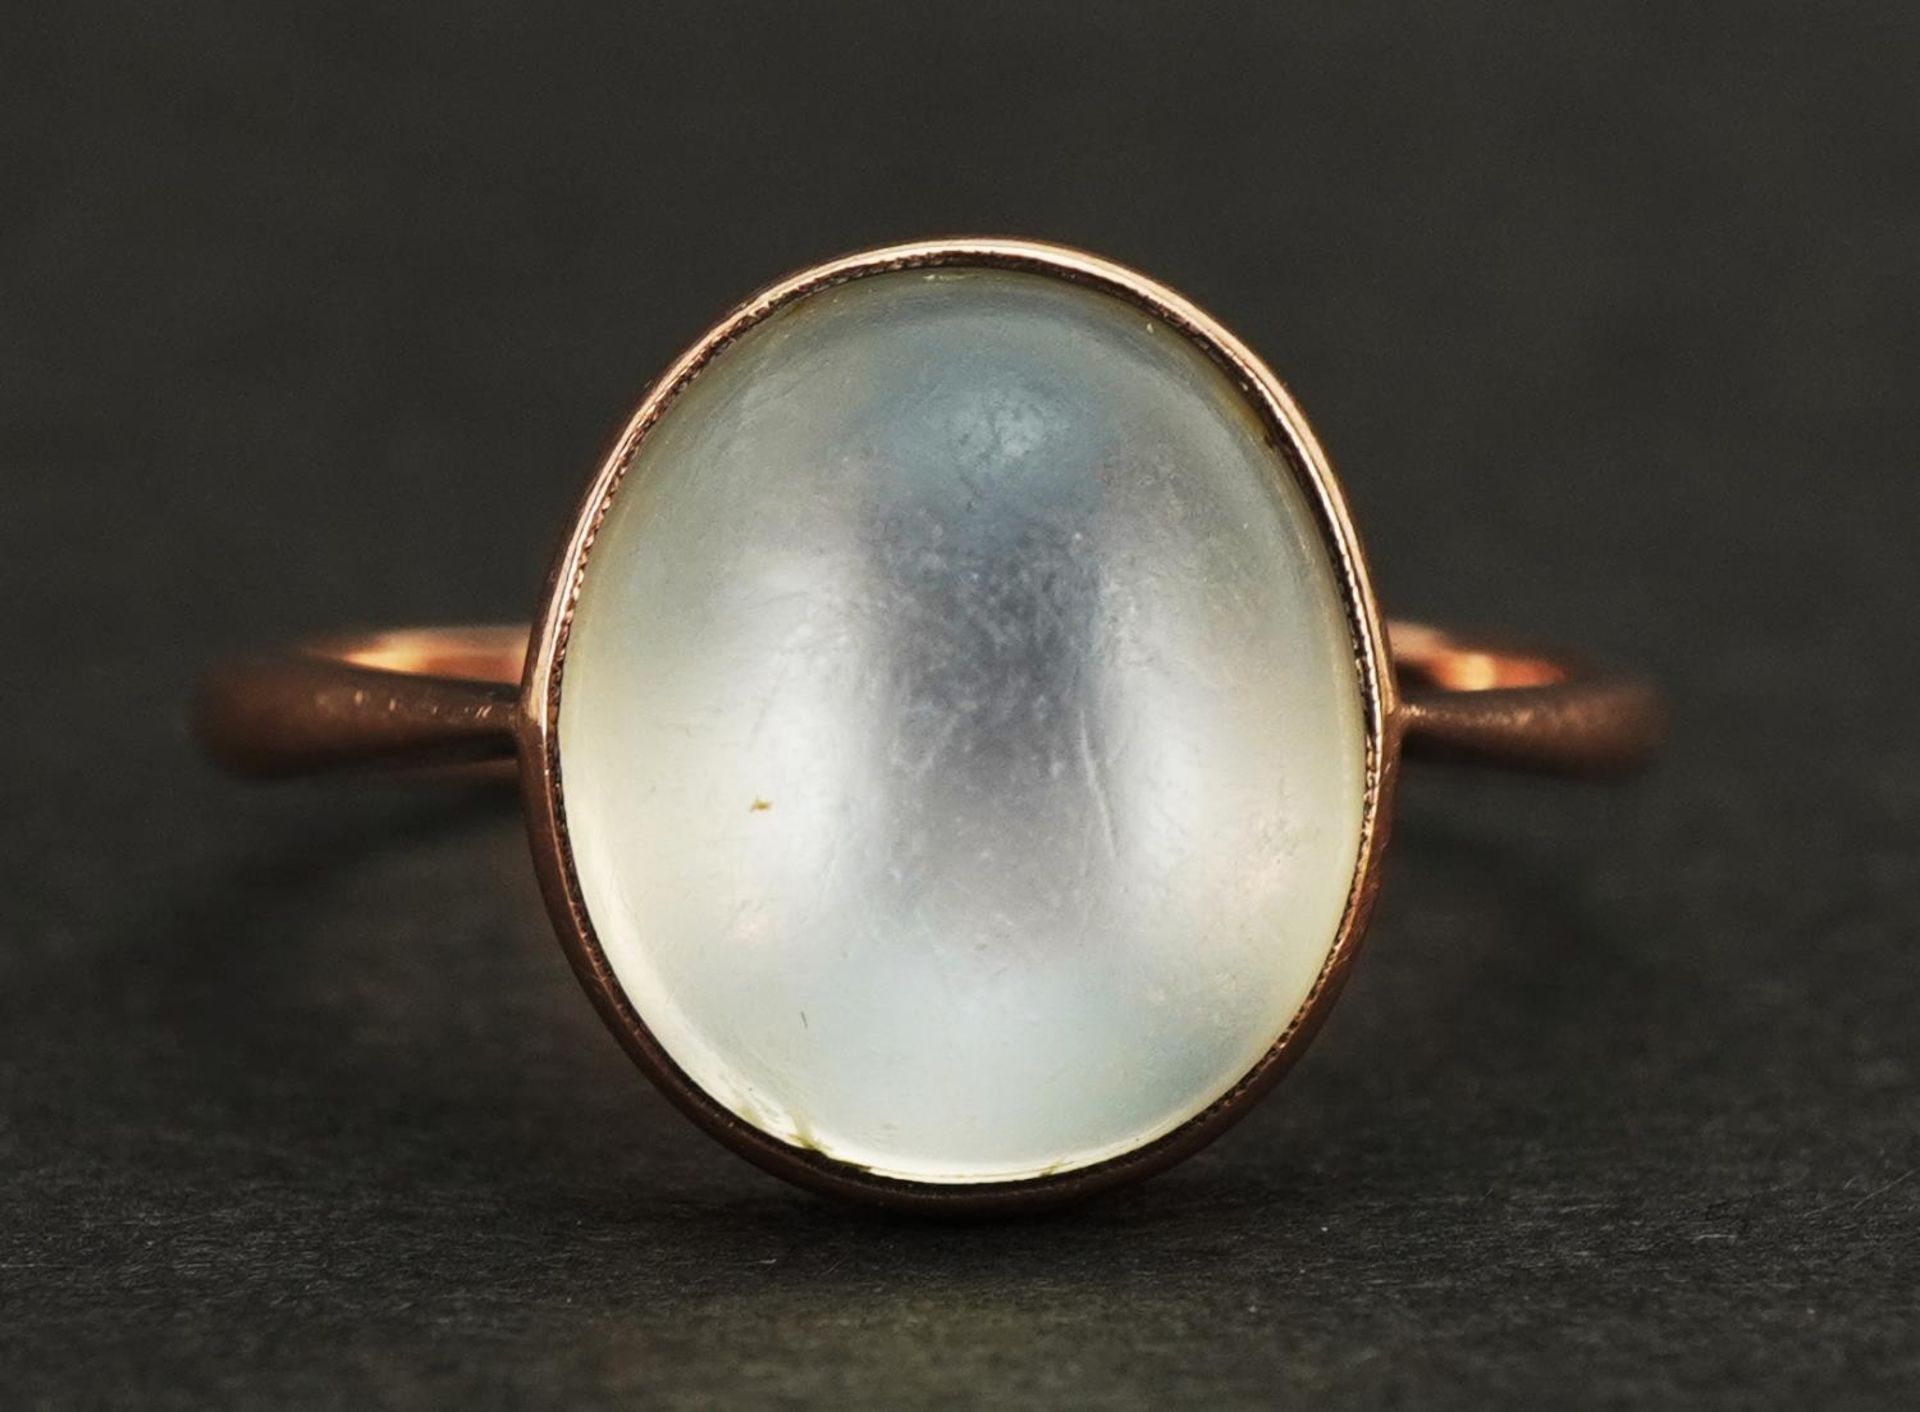 9ct rose gold cabochon moonstone ring, the stone approximately 11.4mm x 9.9mm, size P, 2.7g - Image 2 of 4